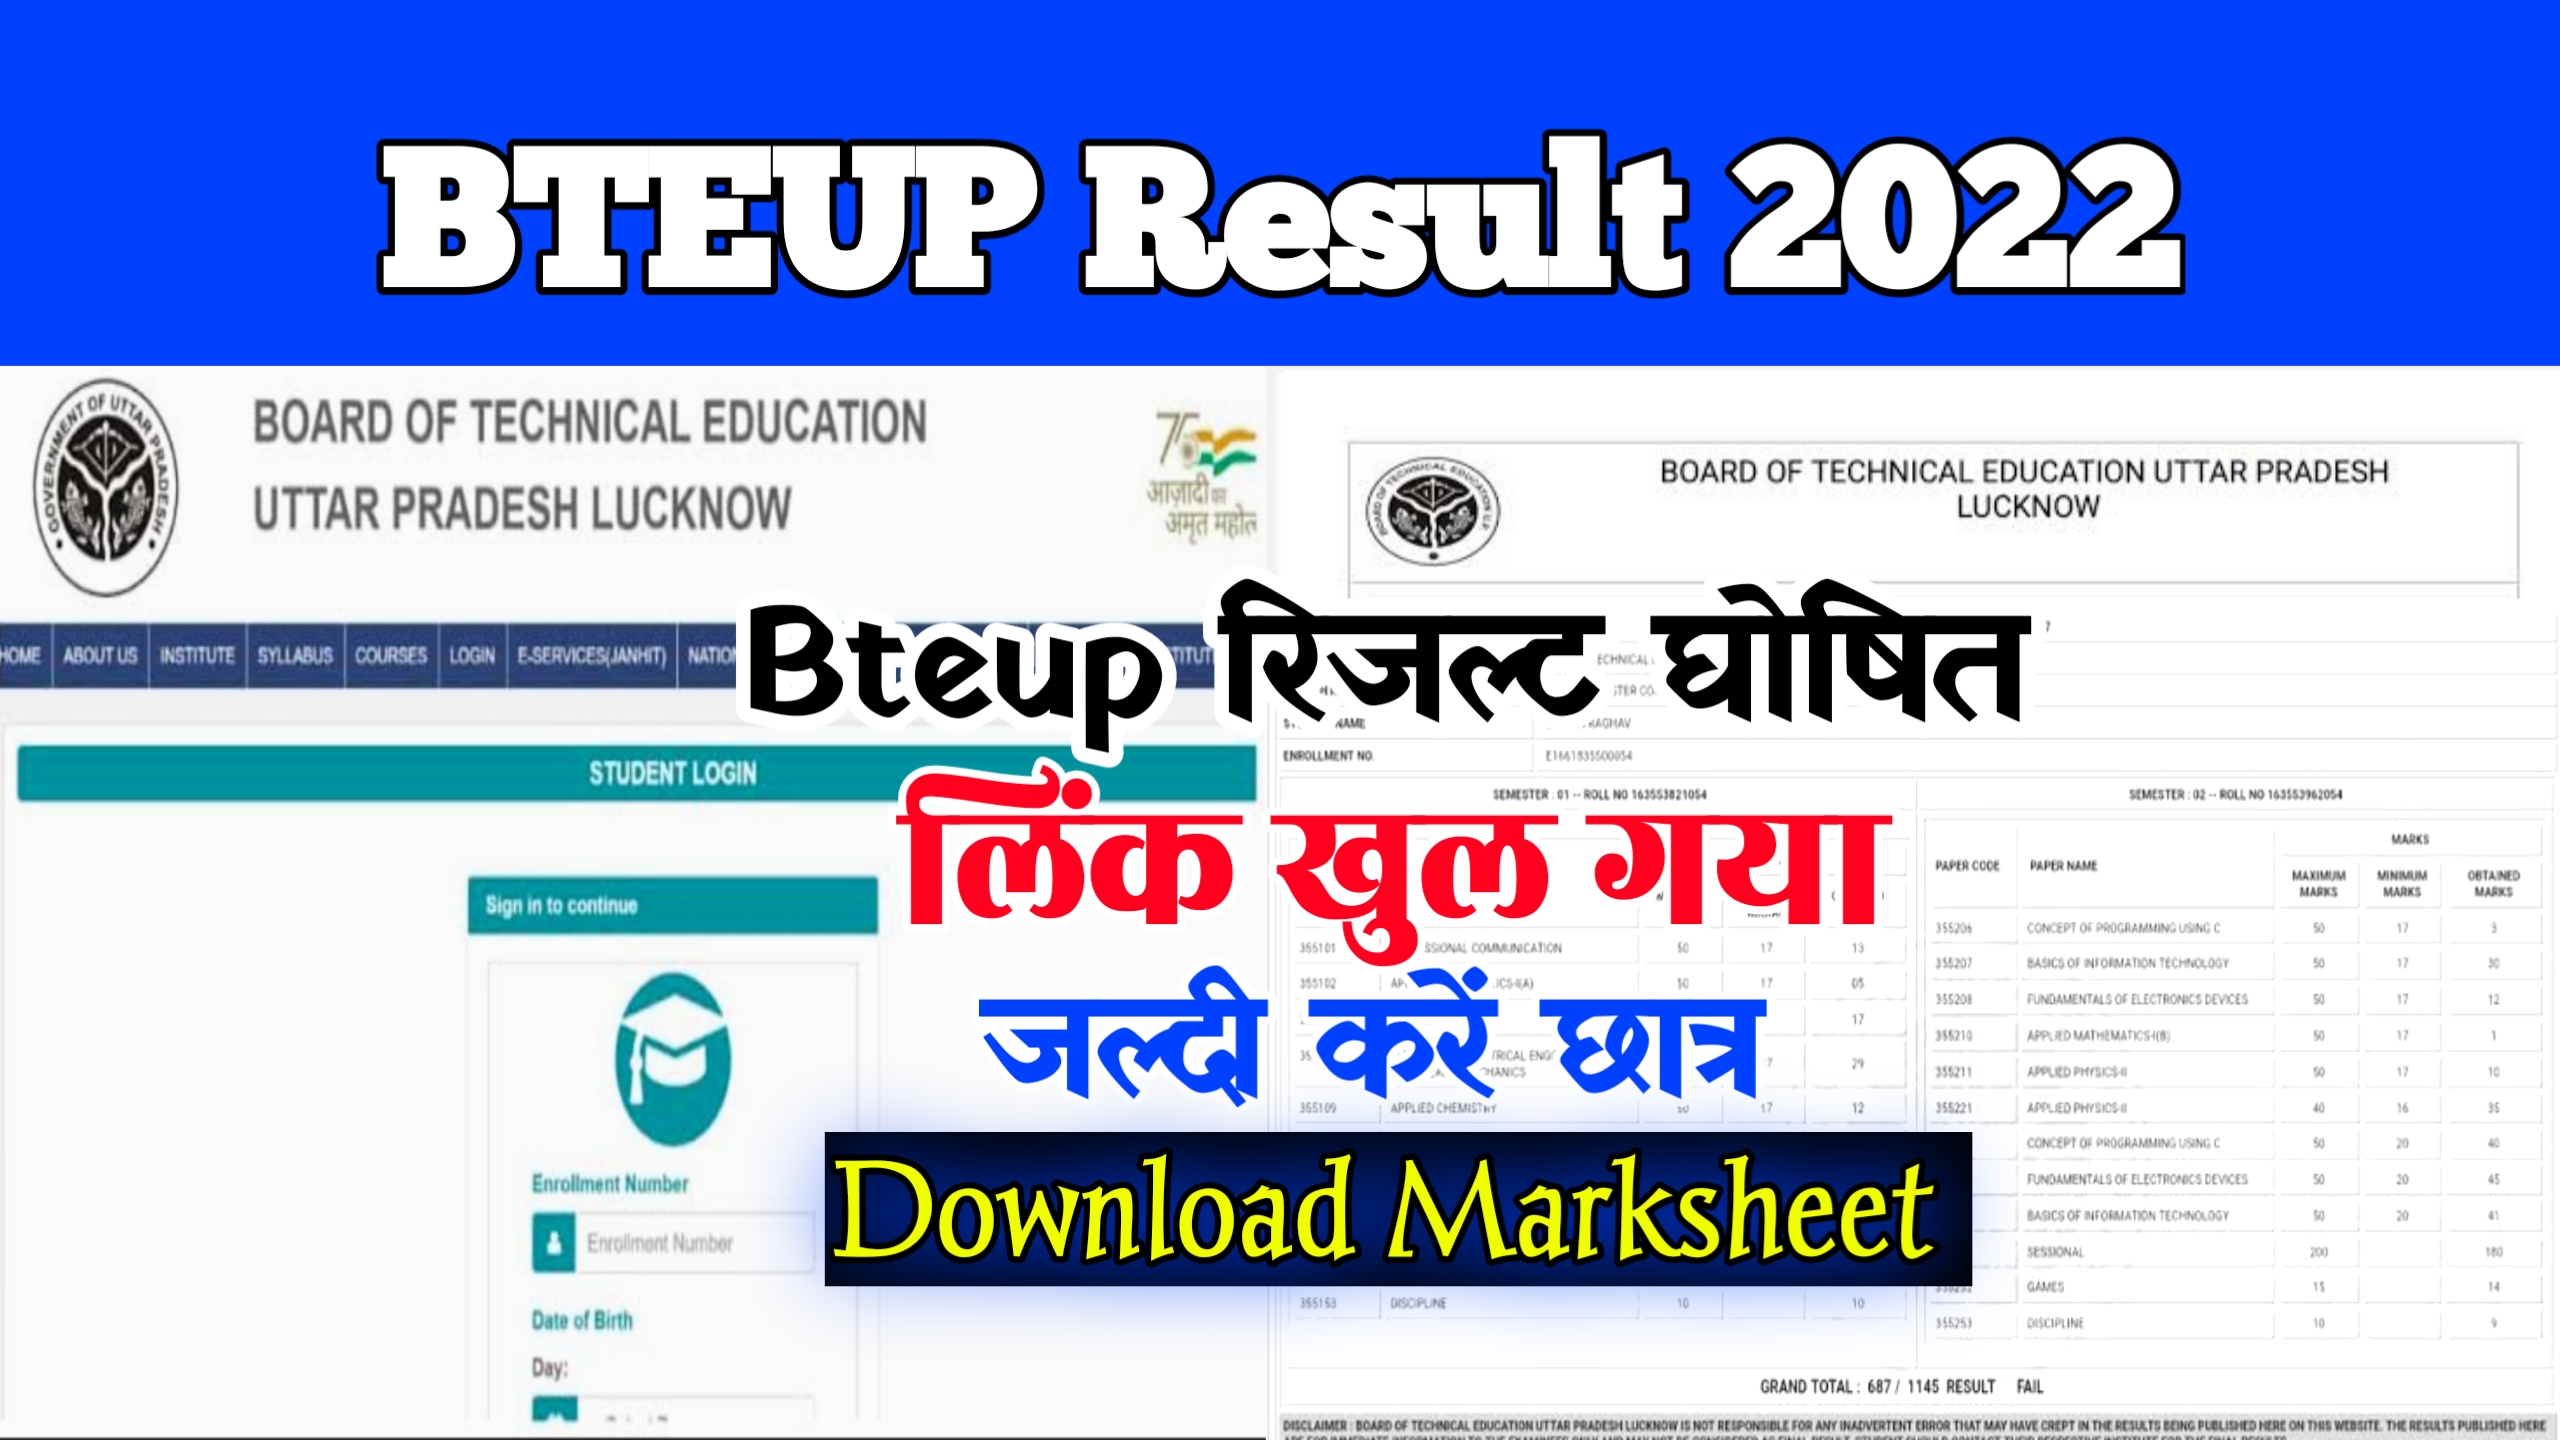 BTEUP Result 2022 Even Semester Link : 2nd, 4th, 6th @bteup.ac.in